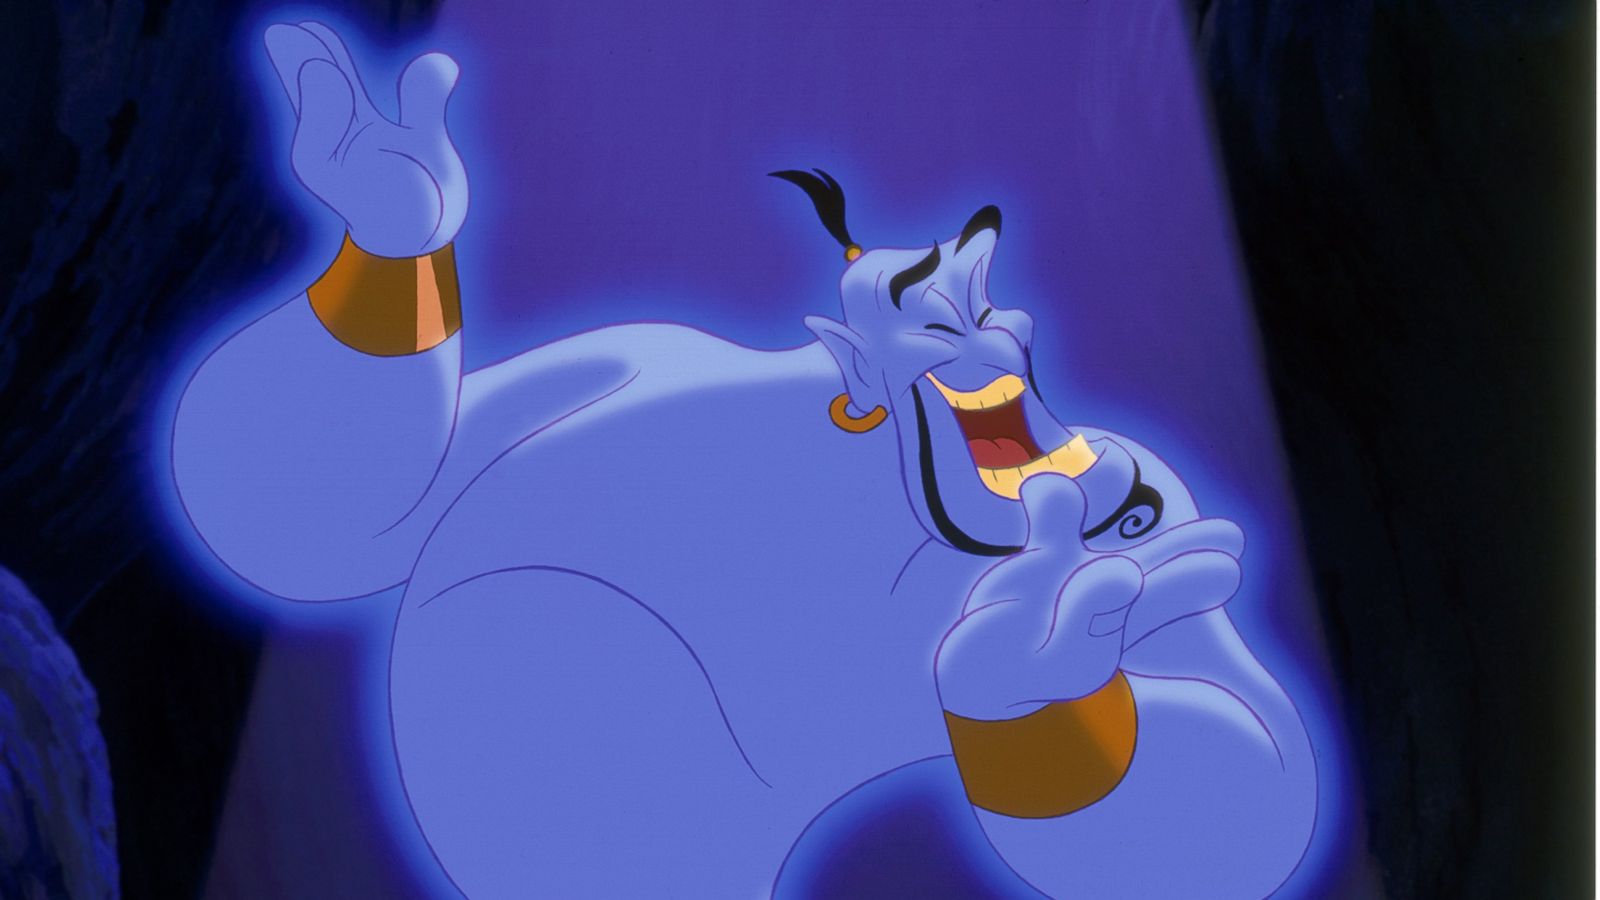 Never-Before-Seen Outtakes of Robin Williams as Genie Revealed in Disney's ' Aladdin' Digital Release - ABC News